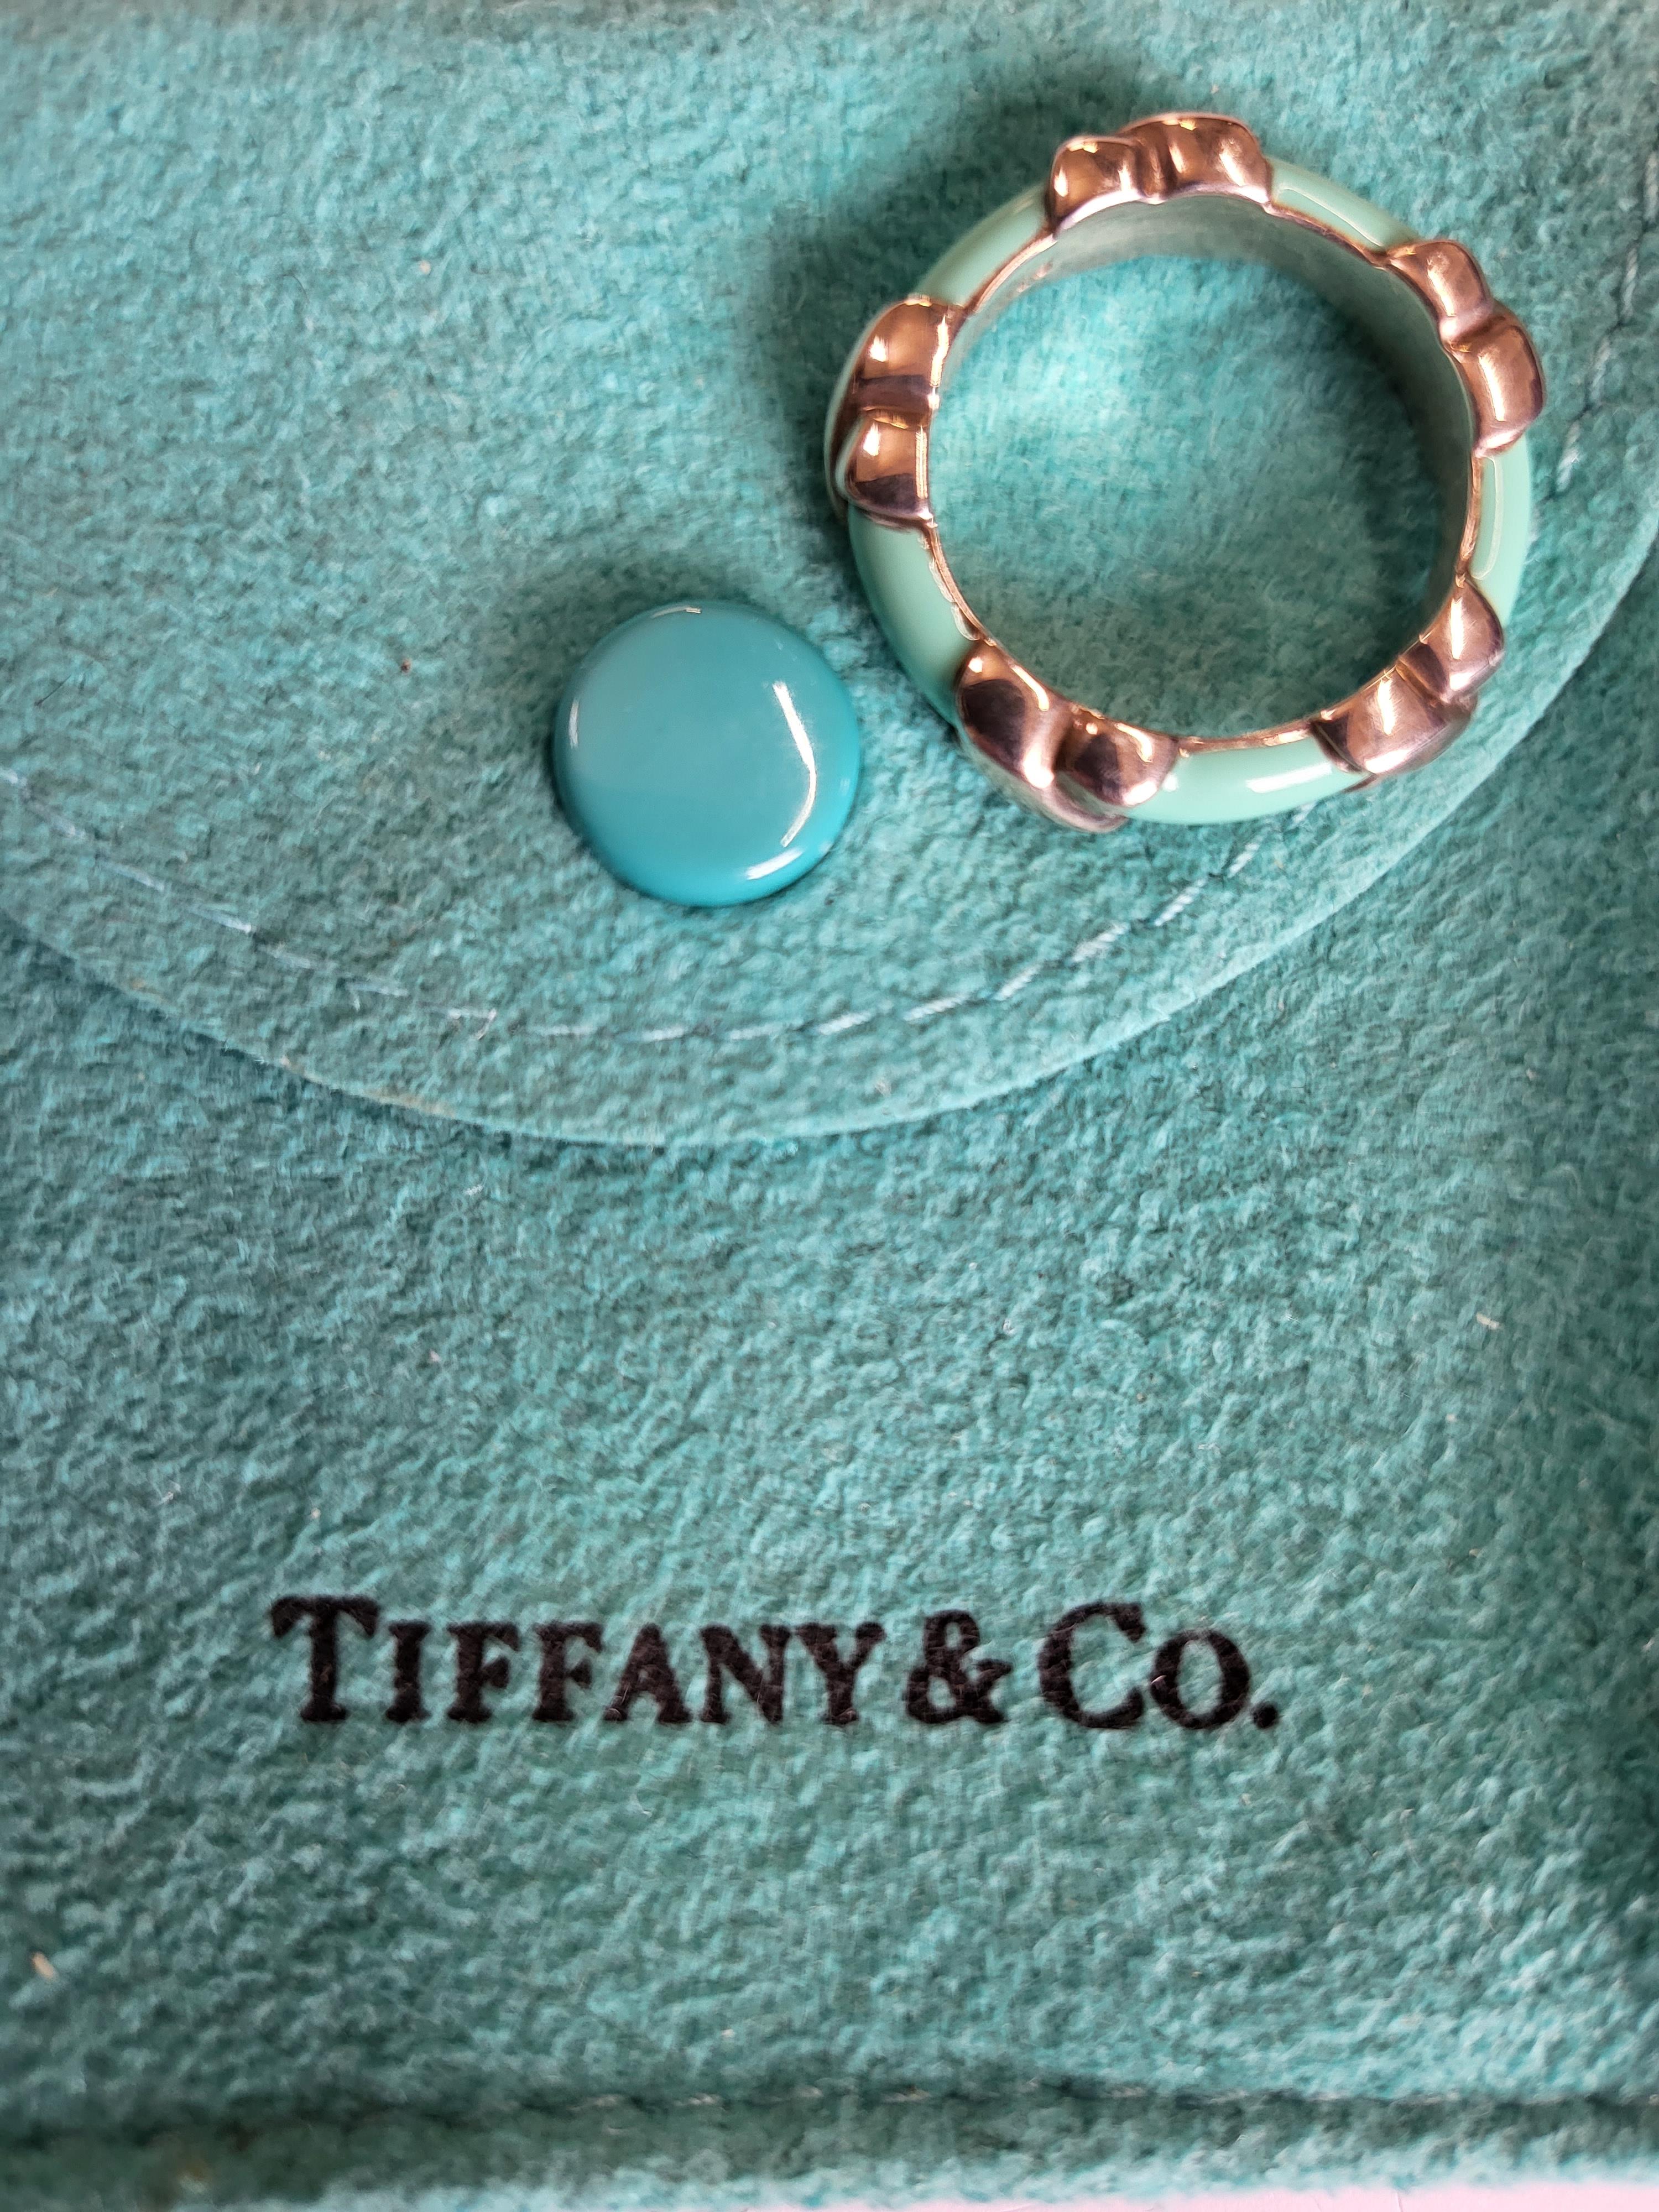 Tiffany silver and turquoise enamel ring with pouch - Image 3 of 3